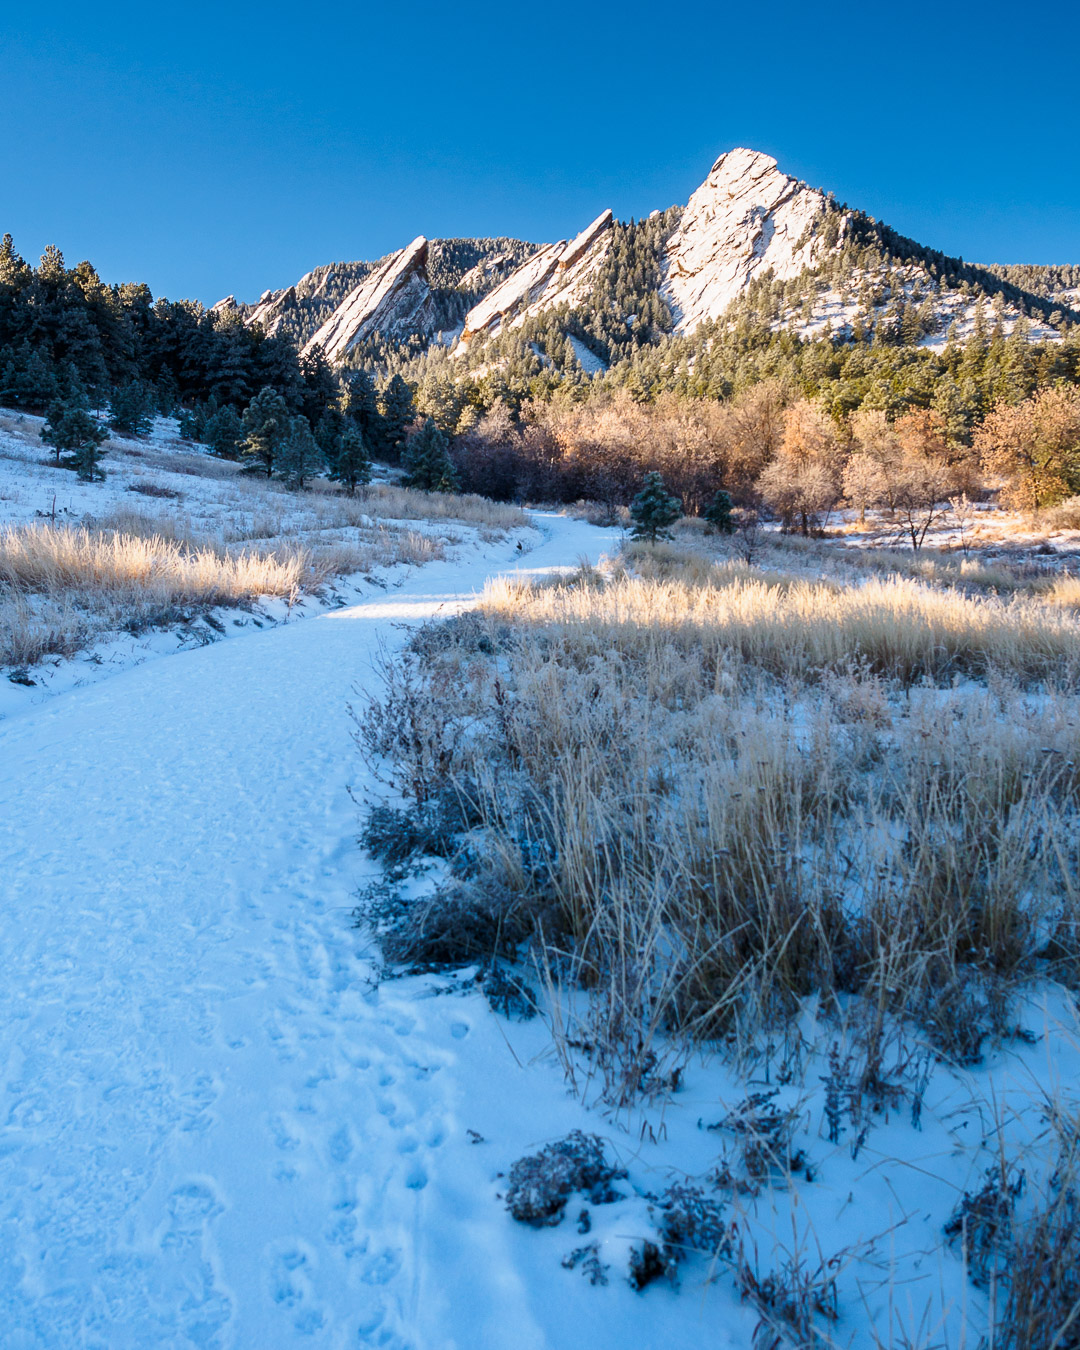 Shadow of the hill covers the trail as the flatirons loom